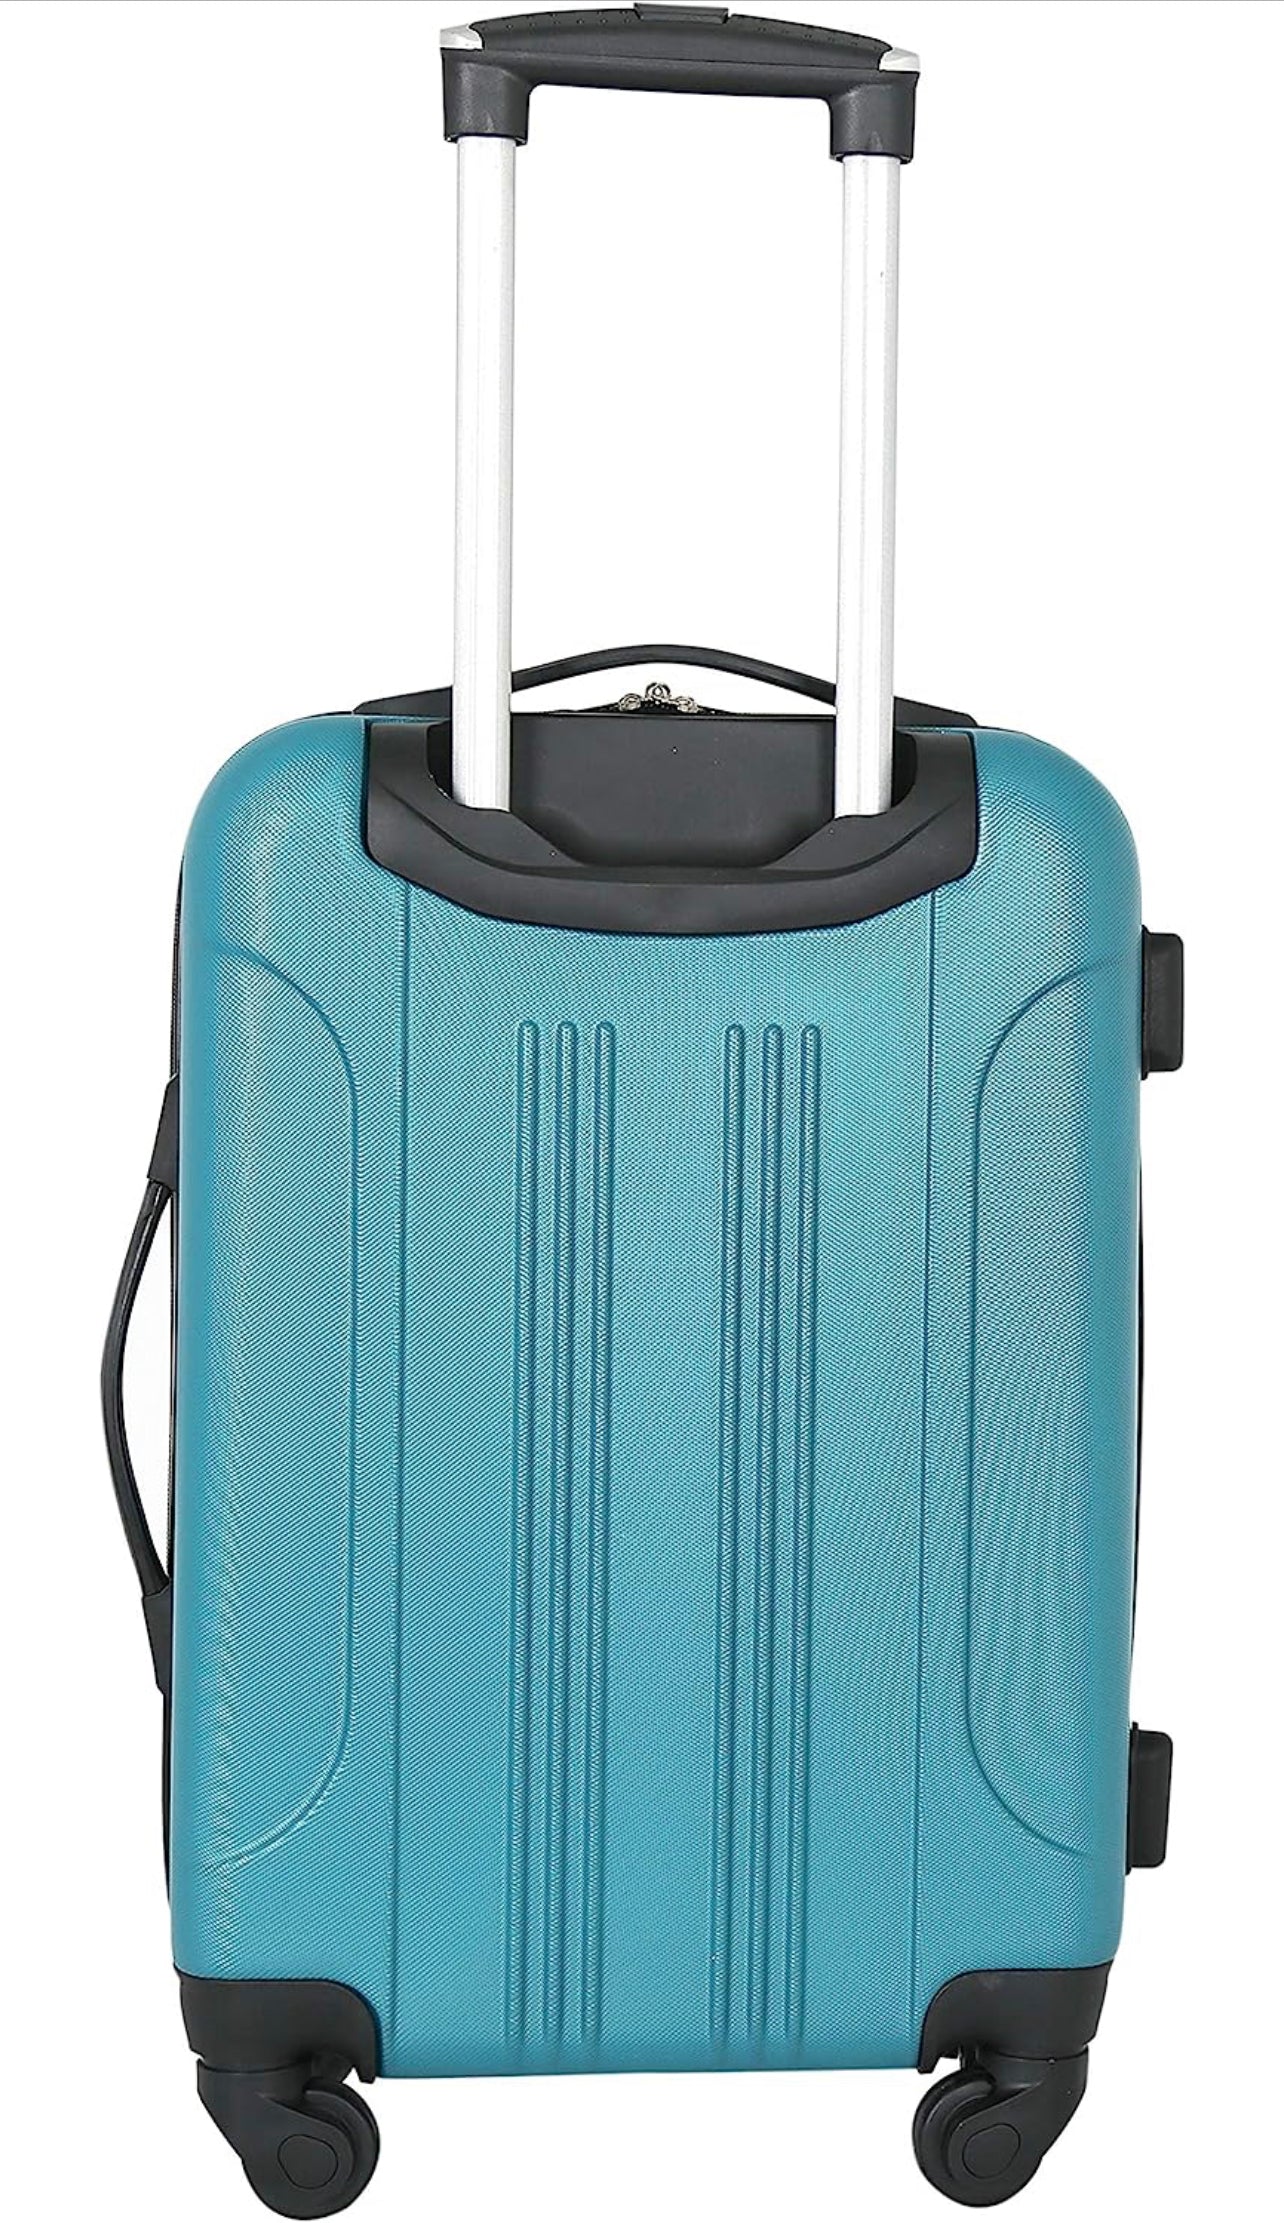 Travelers Club 20" "Chicago" Expandable Spinner Carry-On Luggage Teal Color - MyTravelShop.ca